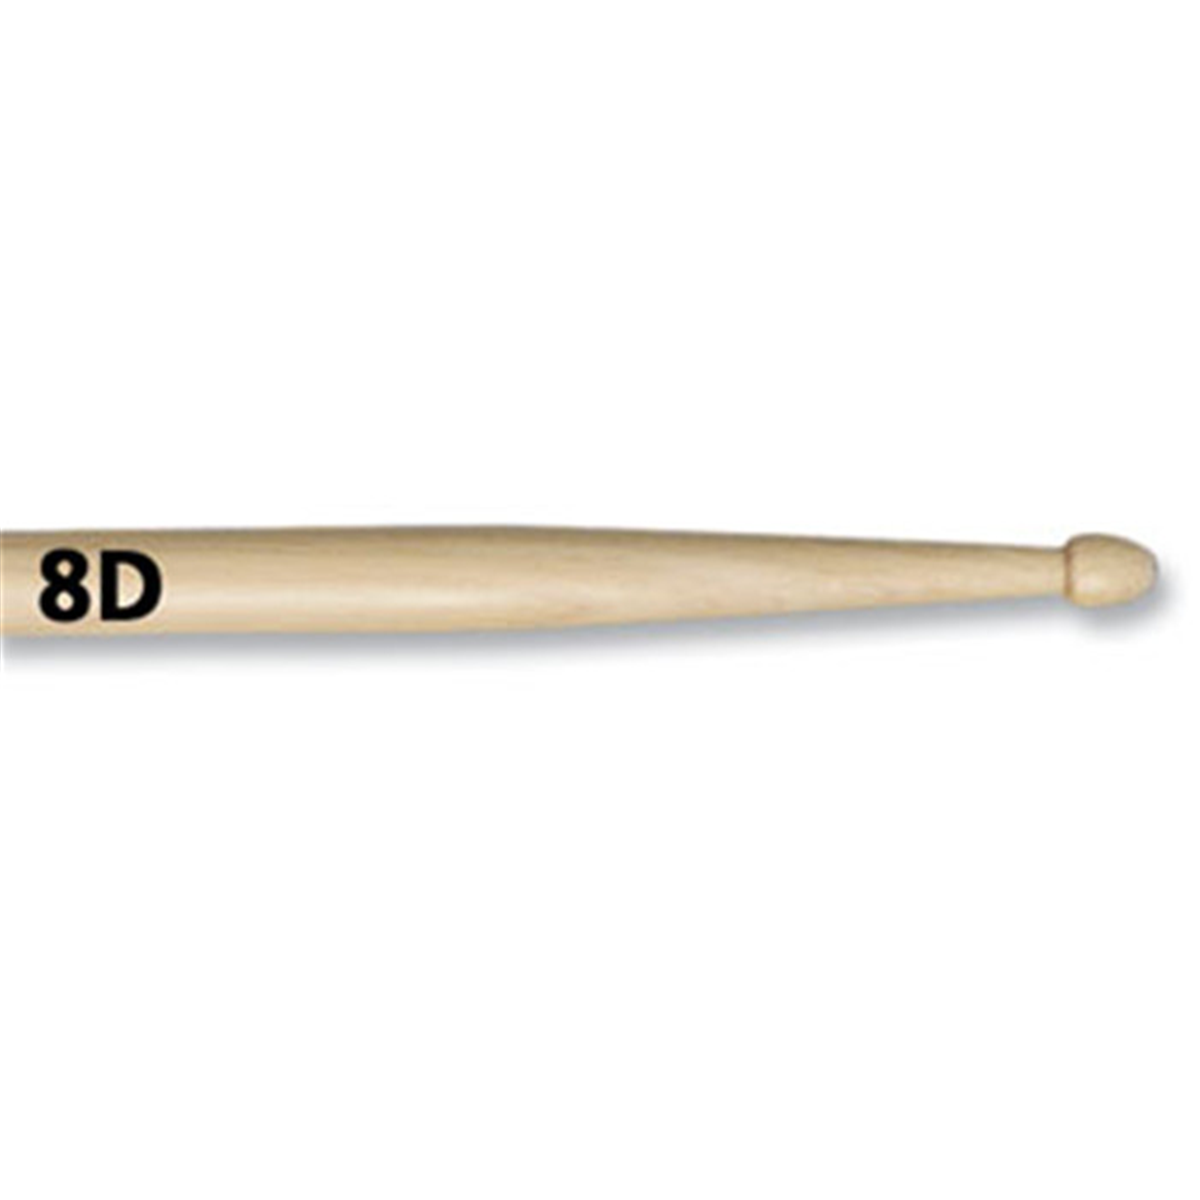 VIC FIRTH American Classic Hickory 8D